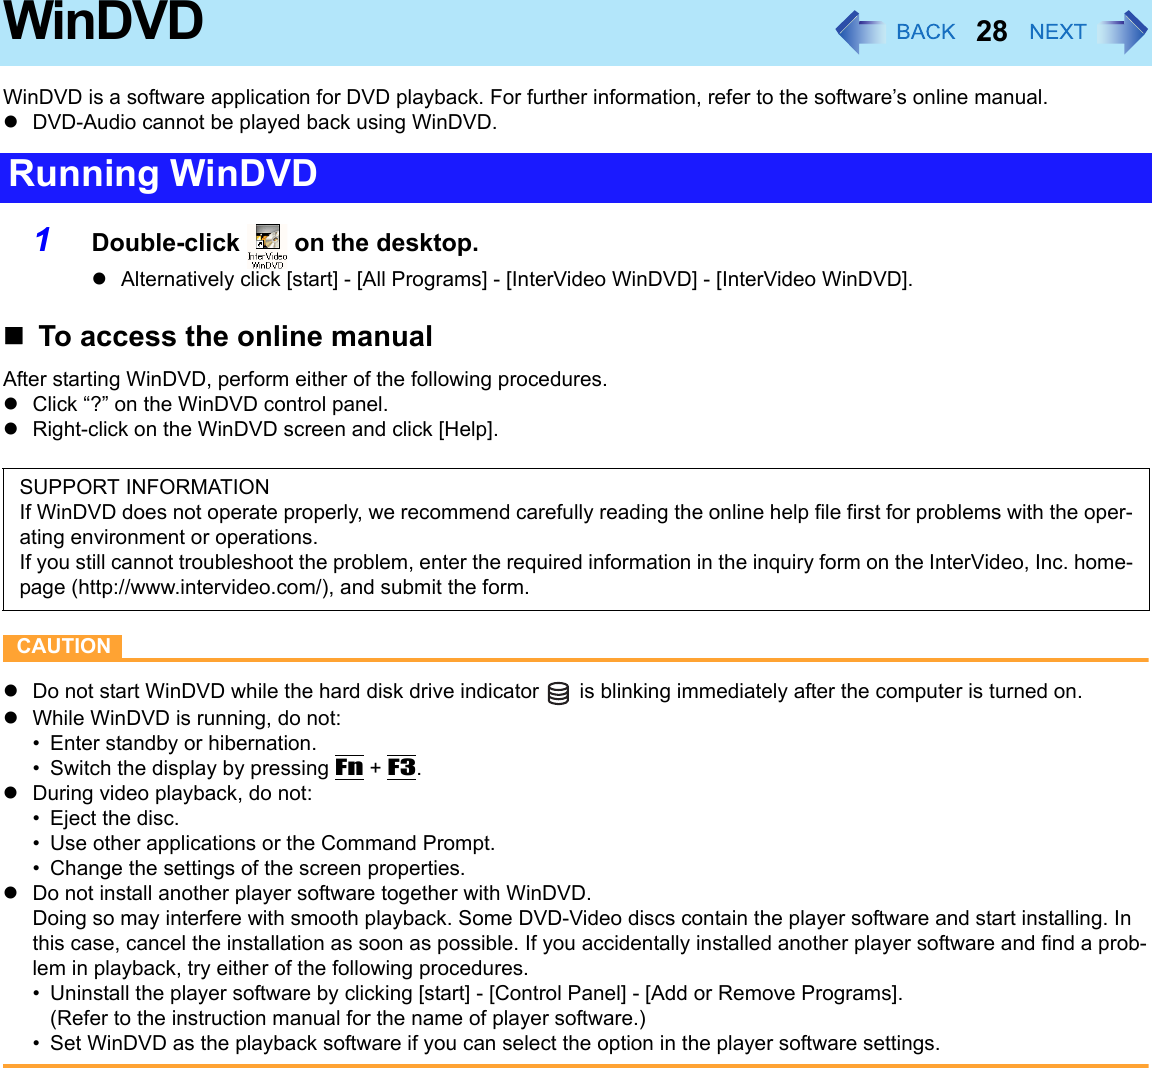 28WinDVDWinDVD is a software application for DVD playback. For further information, refer to the software’s online manual.zDVD-Audio cannot be played back using WinDVD.1Double-click   on the desktop.zAlternatively click [start] - [All Programs] - [InterVideo WinDVD] - [InterVideo WinDVD].To access the online manualAfter starting WinDVD, perform either of the following procedures.zClick “?” on the WinDVD control panel.zRight-click on the WinDVD screen and click [Help].CAUTIONzDo not start WinDVD while the hard disk drive indicator   is blinking immediately after the computer is turned on.zWhile WinDVD is running, do not:• Enter standby or hibernation.• Switch the display by pressing Fn + F3.zDuring video playback, do not:• Eject the disc.• Use other applications or the Command Prompt.• Change the settings of the screen properties.zDo not install another player software together with WinDVD.Doing so may interfere with smooth playback. Some DVD-Video discs contain the player software and start installing. In this case, cancel the installation as soon as possible. If you accidentally installed another player software and find a prob-lem in playback, try either of the following procedures.• Uninstall the player software by clicking [start] - [Control Panel] - [Add or Remove Programs].(Refer to the instruction manual for the name of player software.)• Set WinDVD as the playback software if you can select the option in the player software settings.Running WinDVDSUPPORT INFORMATIONIf WinDVD does not operate properly, we recommend carefully reading the online help file first for problems with the oper-ating environment or operations.If you still cannot troubleshoot the problem, enter the required information in the inquiry form on the InterVideo, Inc. home-page (http://www.intervideo.com/), and submit the form.